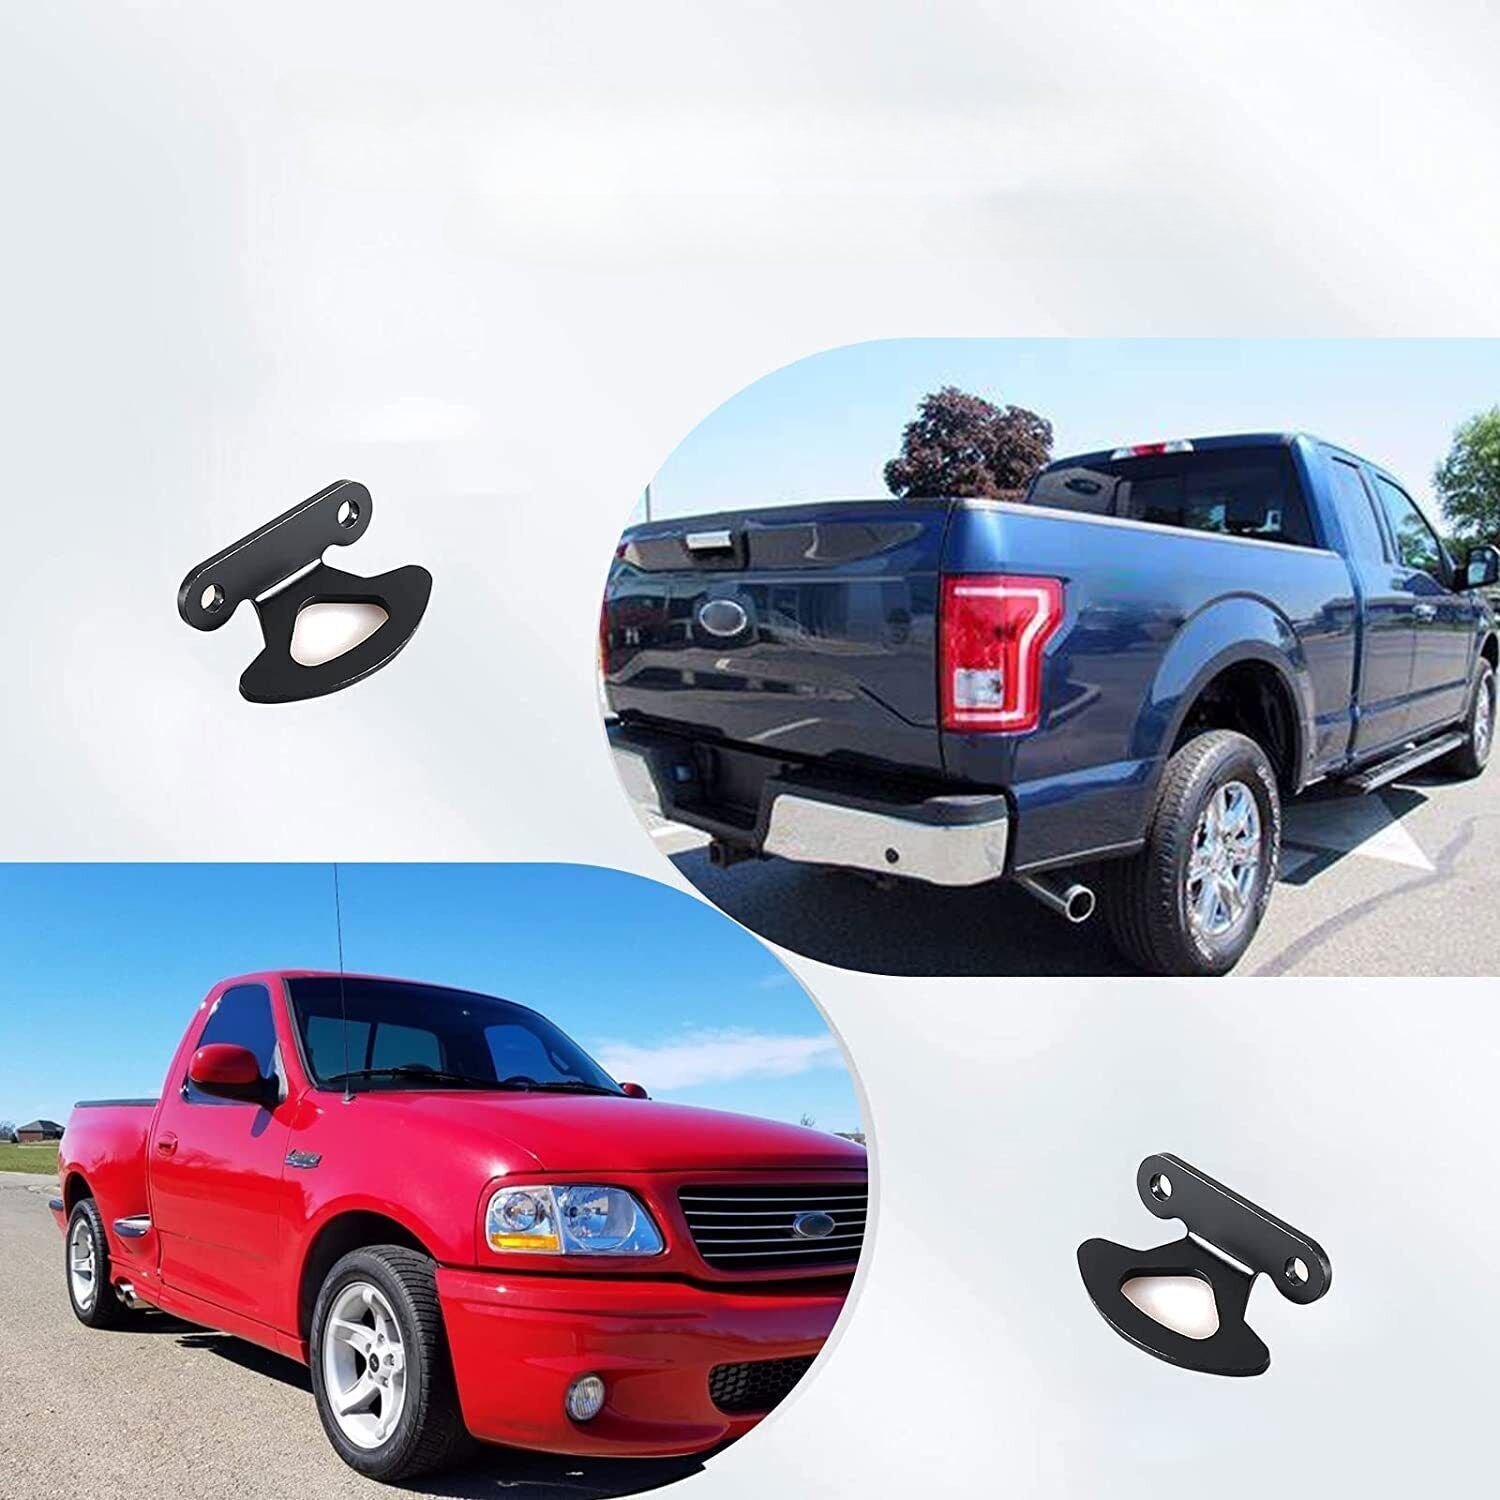 Truck Bed Tie Down Hooks Tool for 2000-2017 Ford F150 Black 4Pcs